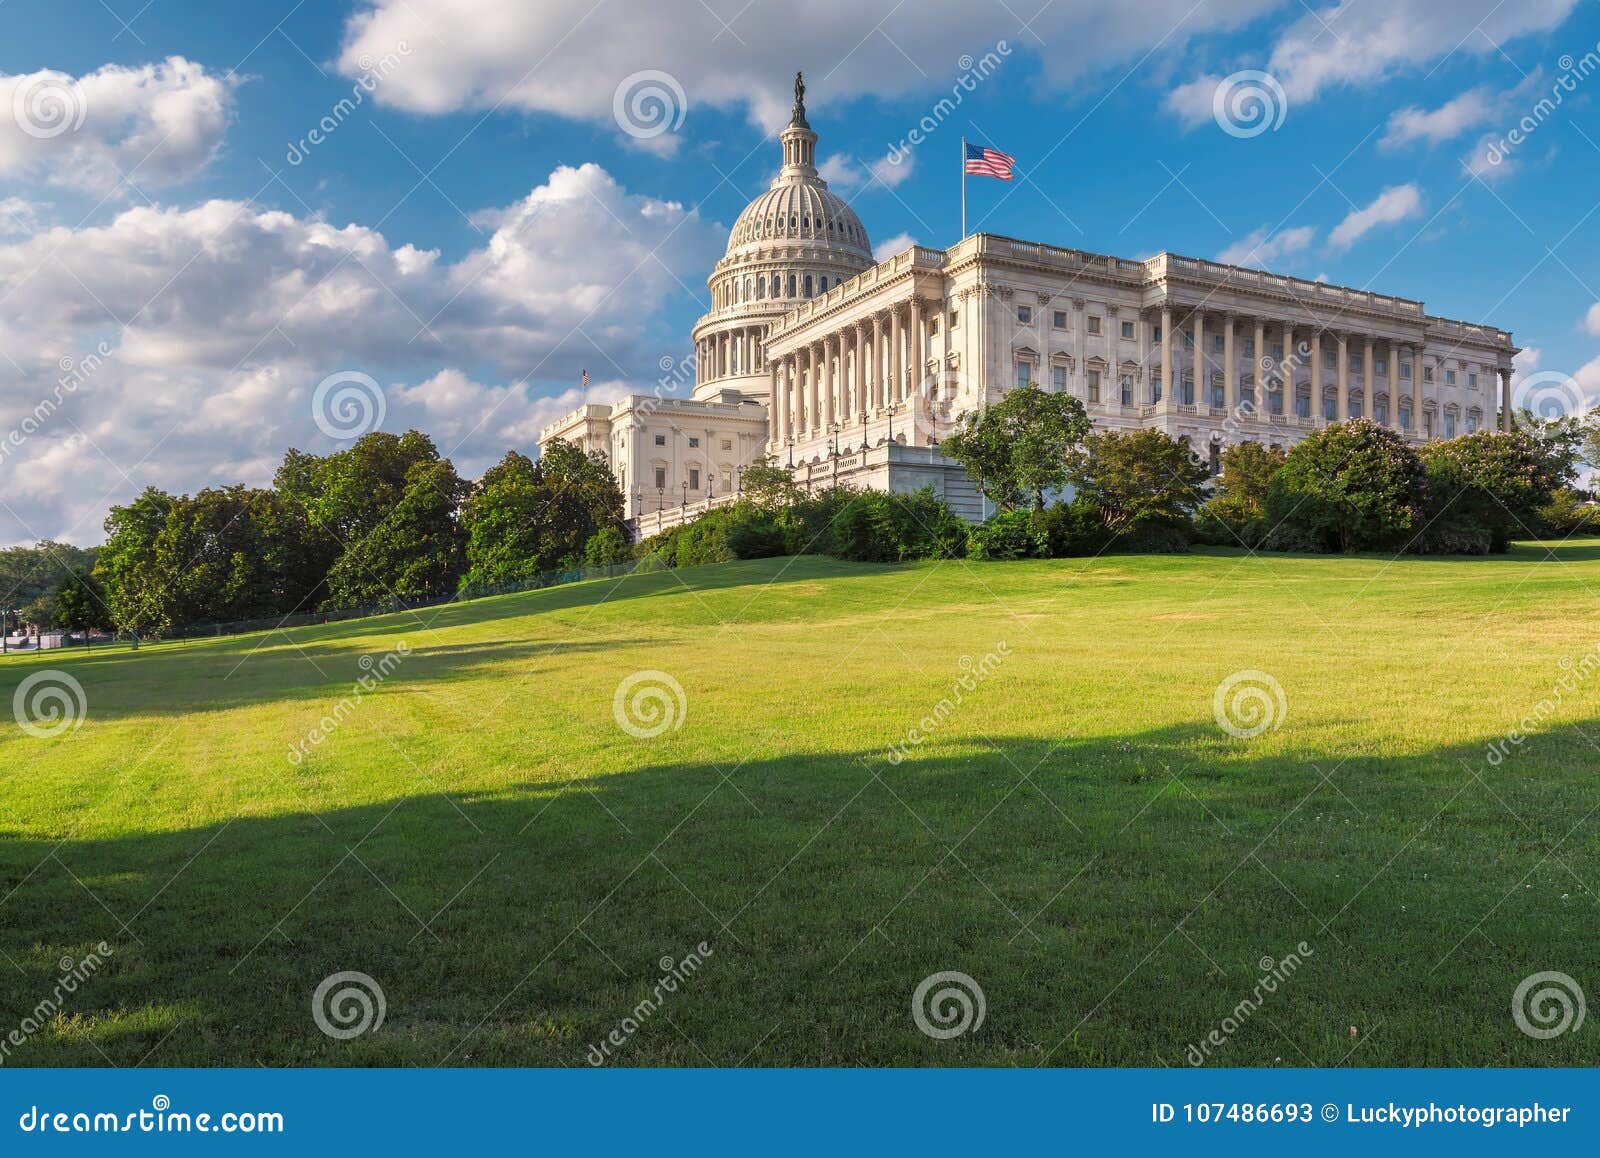 washington dc, the united states capitol on capitol hill